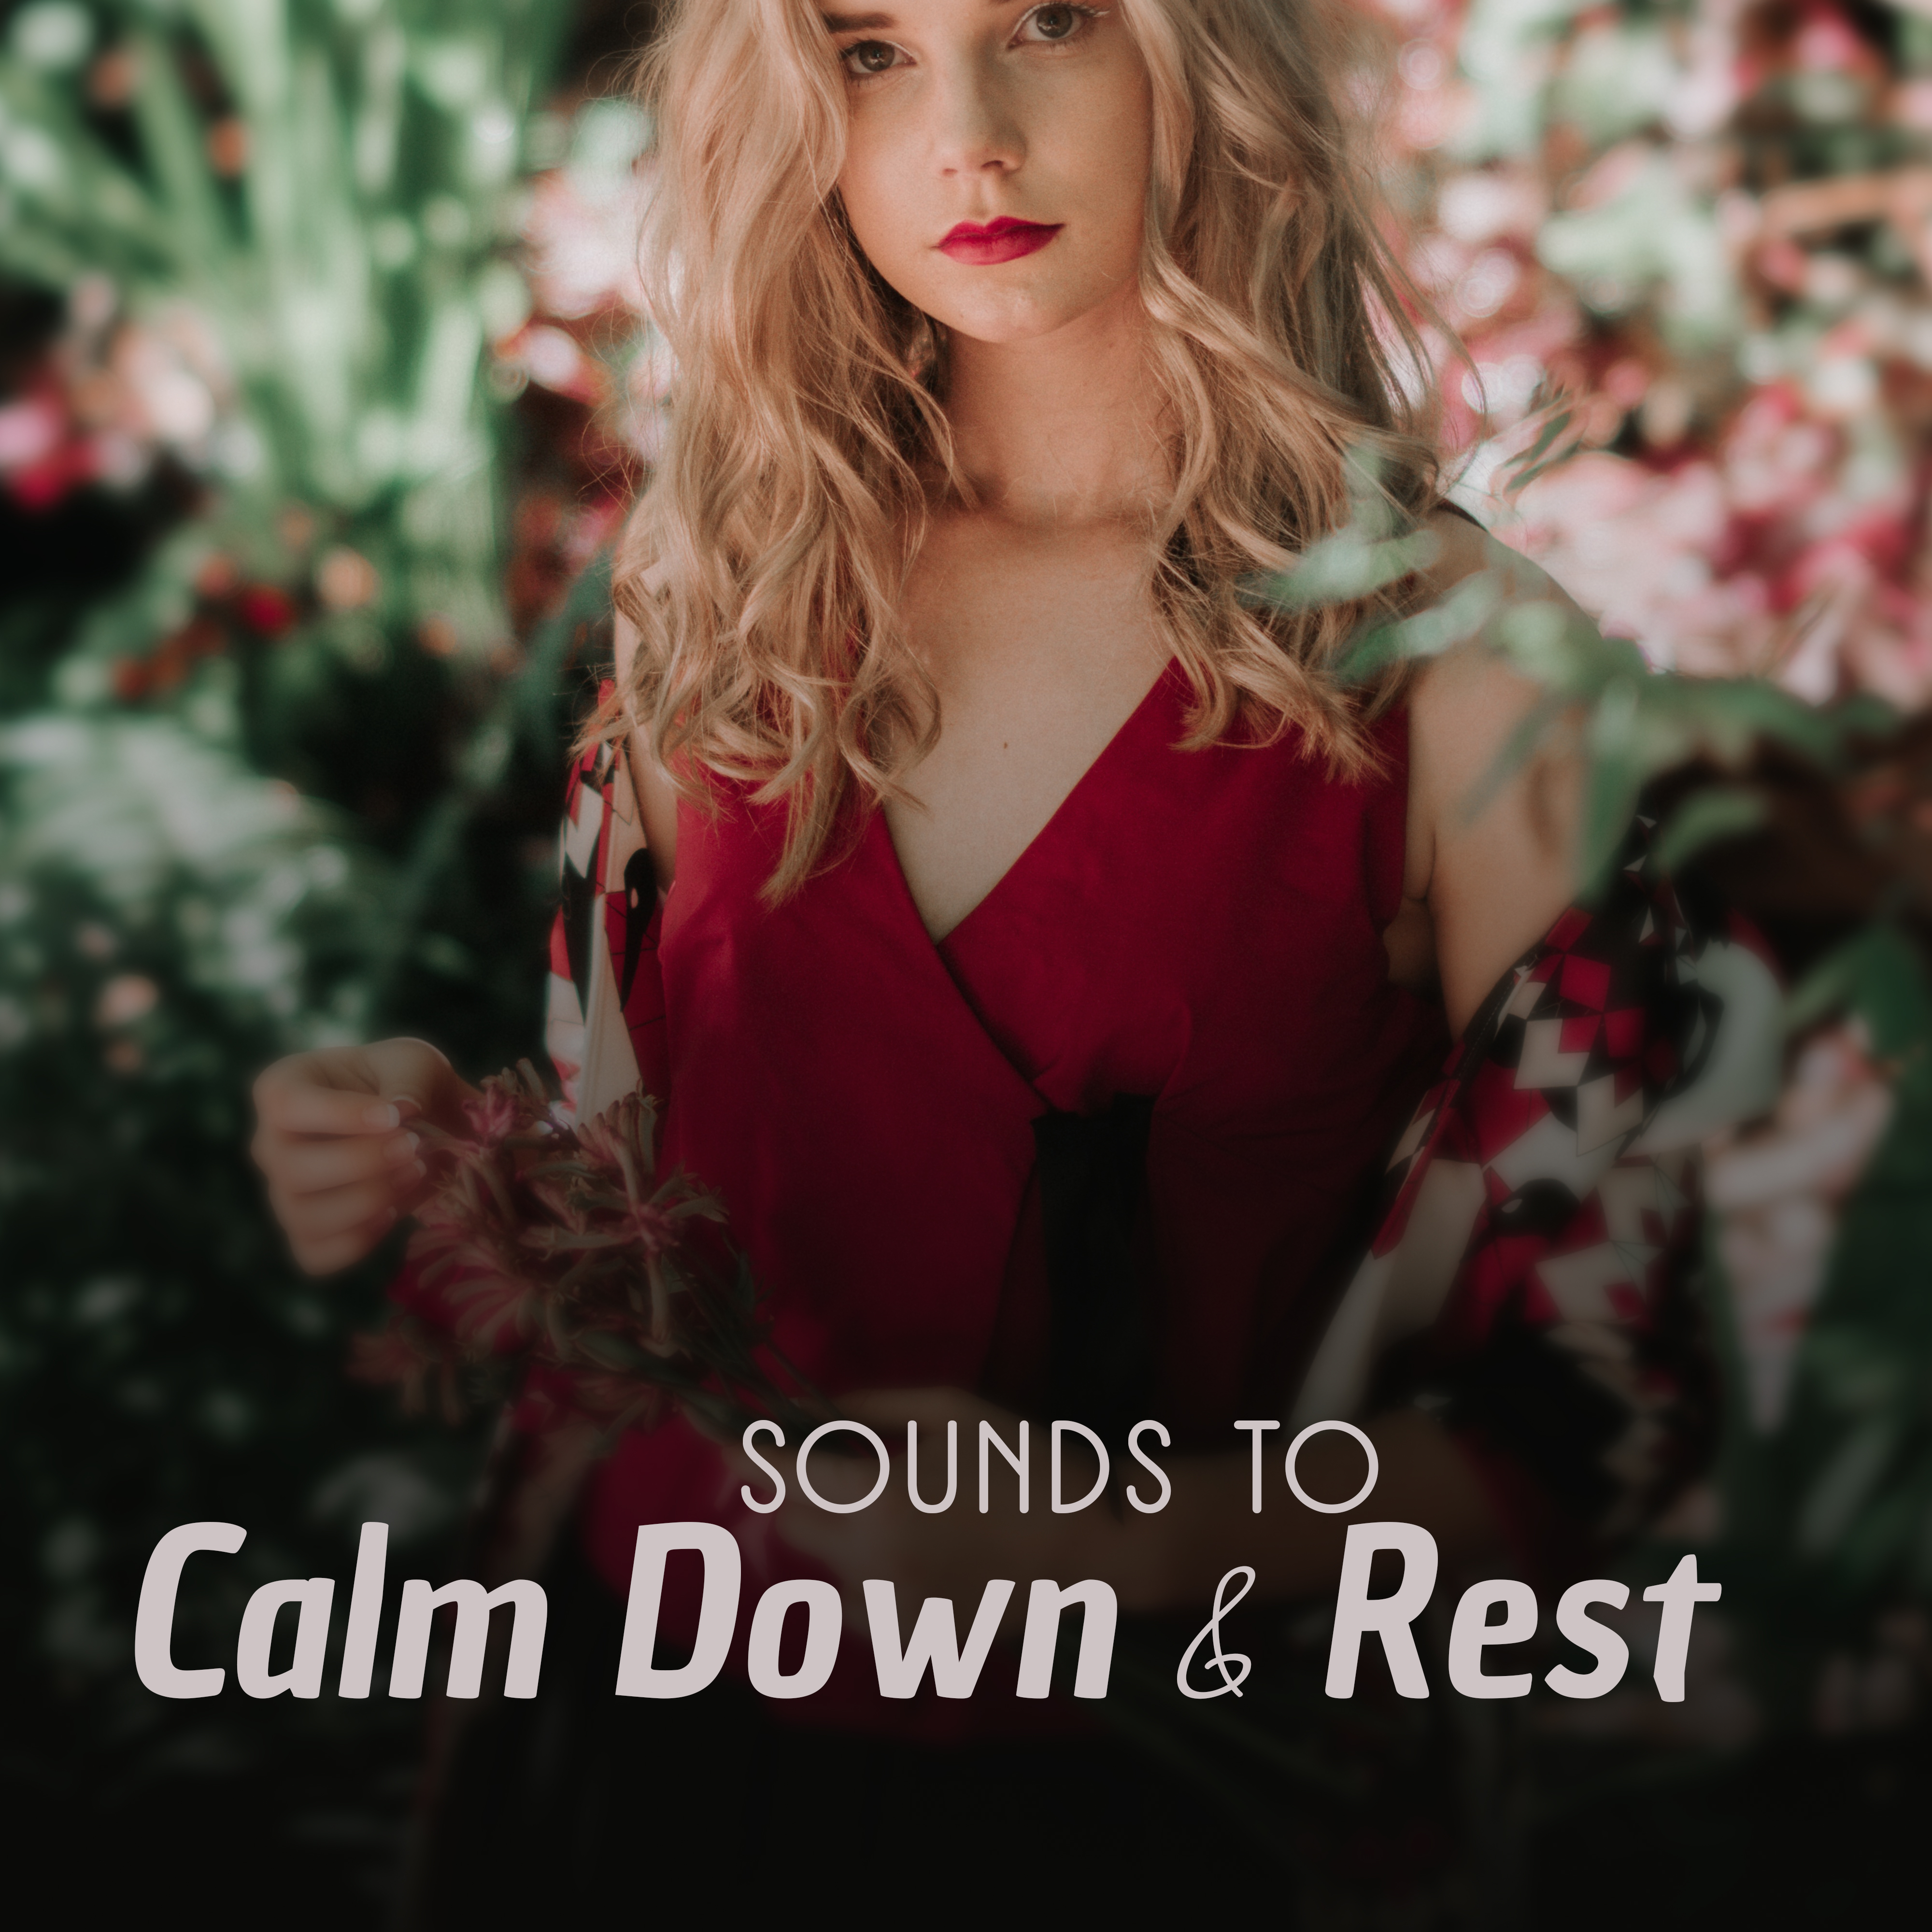 Sounds to Calm Down & Rest – Easy Listening, New Age Melodies to Relax, Peaceful Sounds for Mind Calmness, Body Relaxation